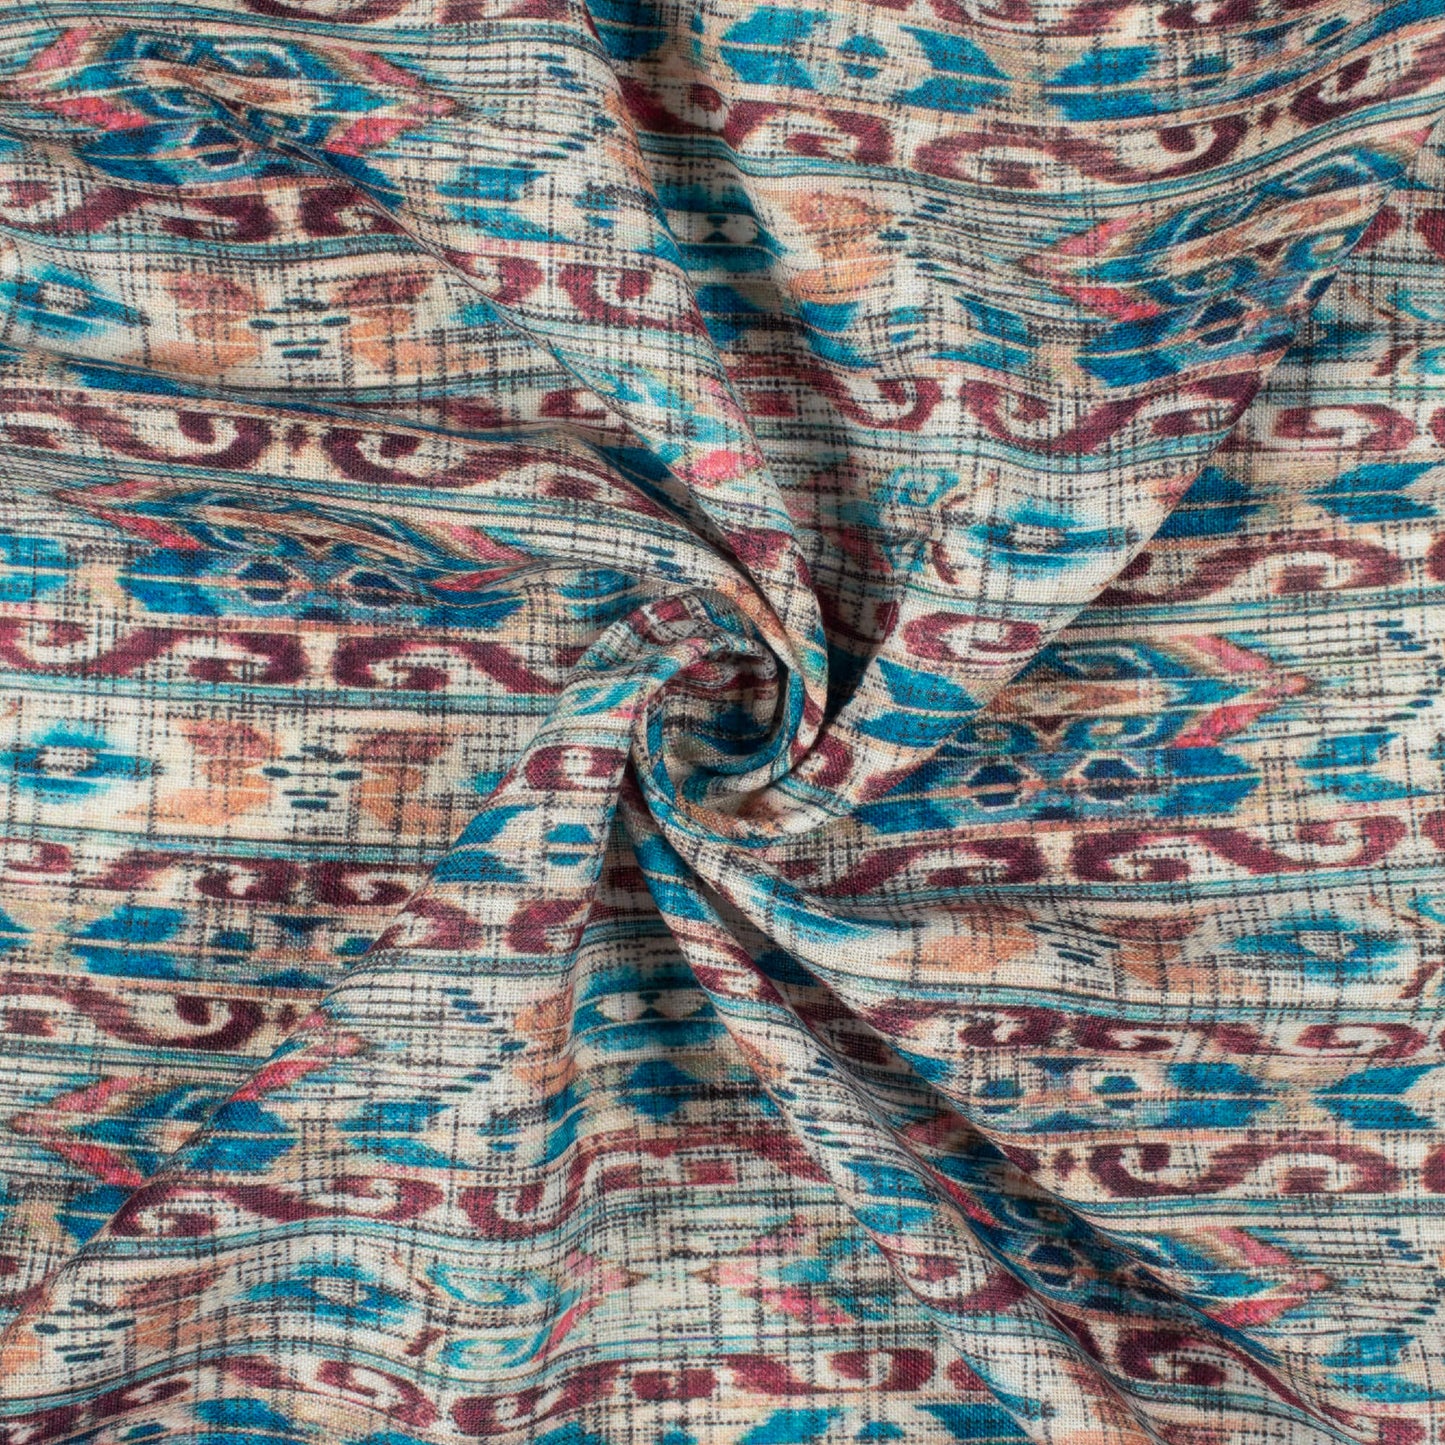 Teal Green And Hickory Brown Ethnic Pattern Digital Print Linen Textured Fabric (Width 56 Inches)